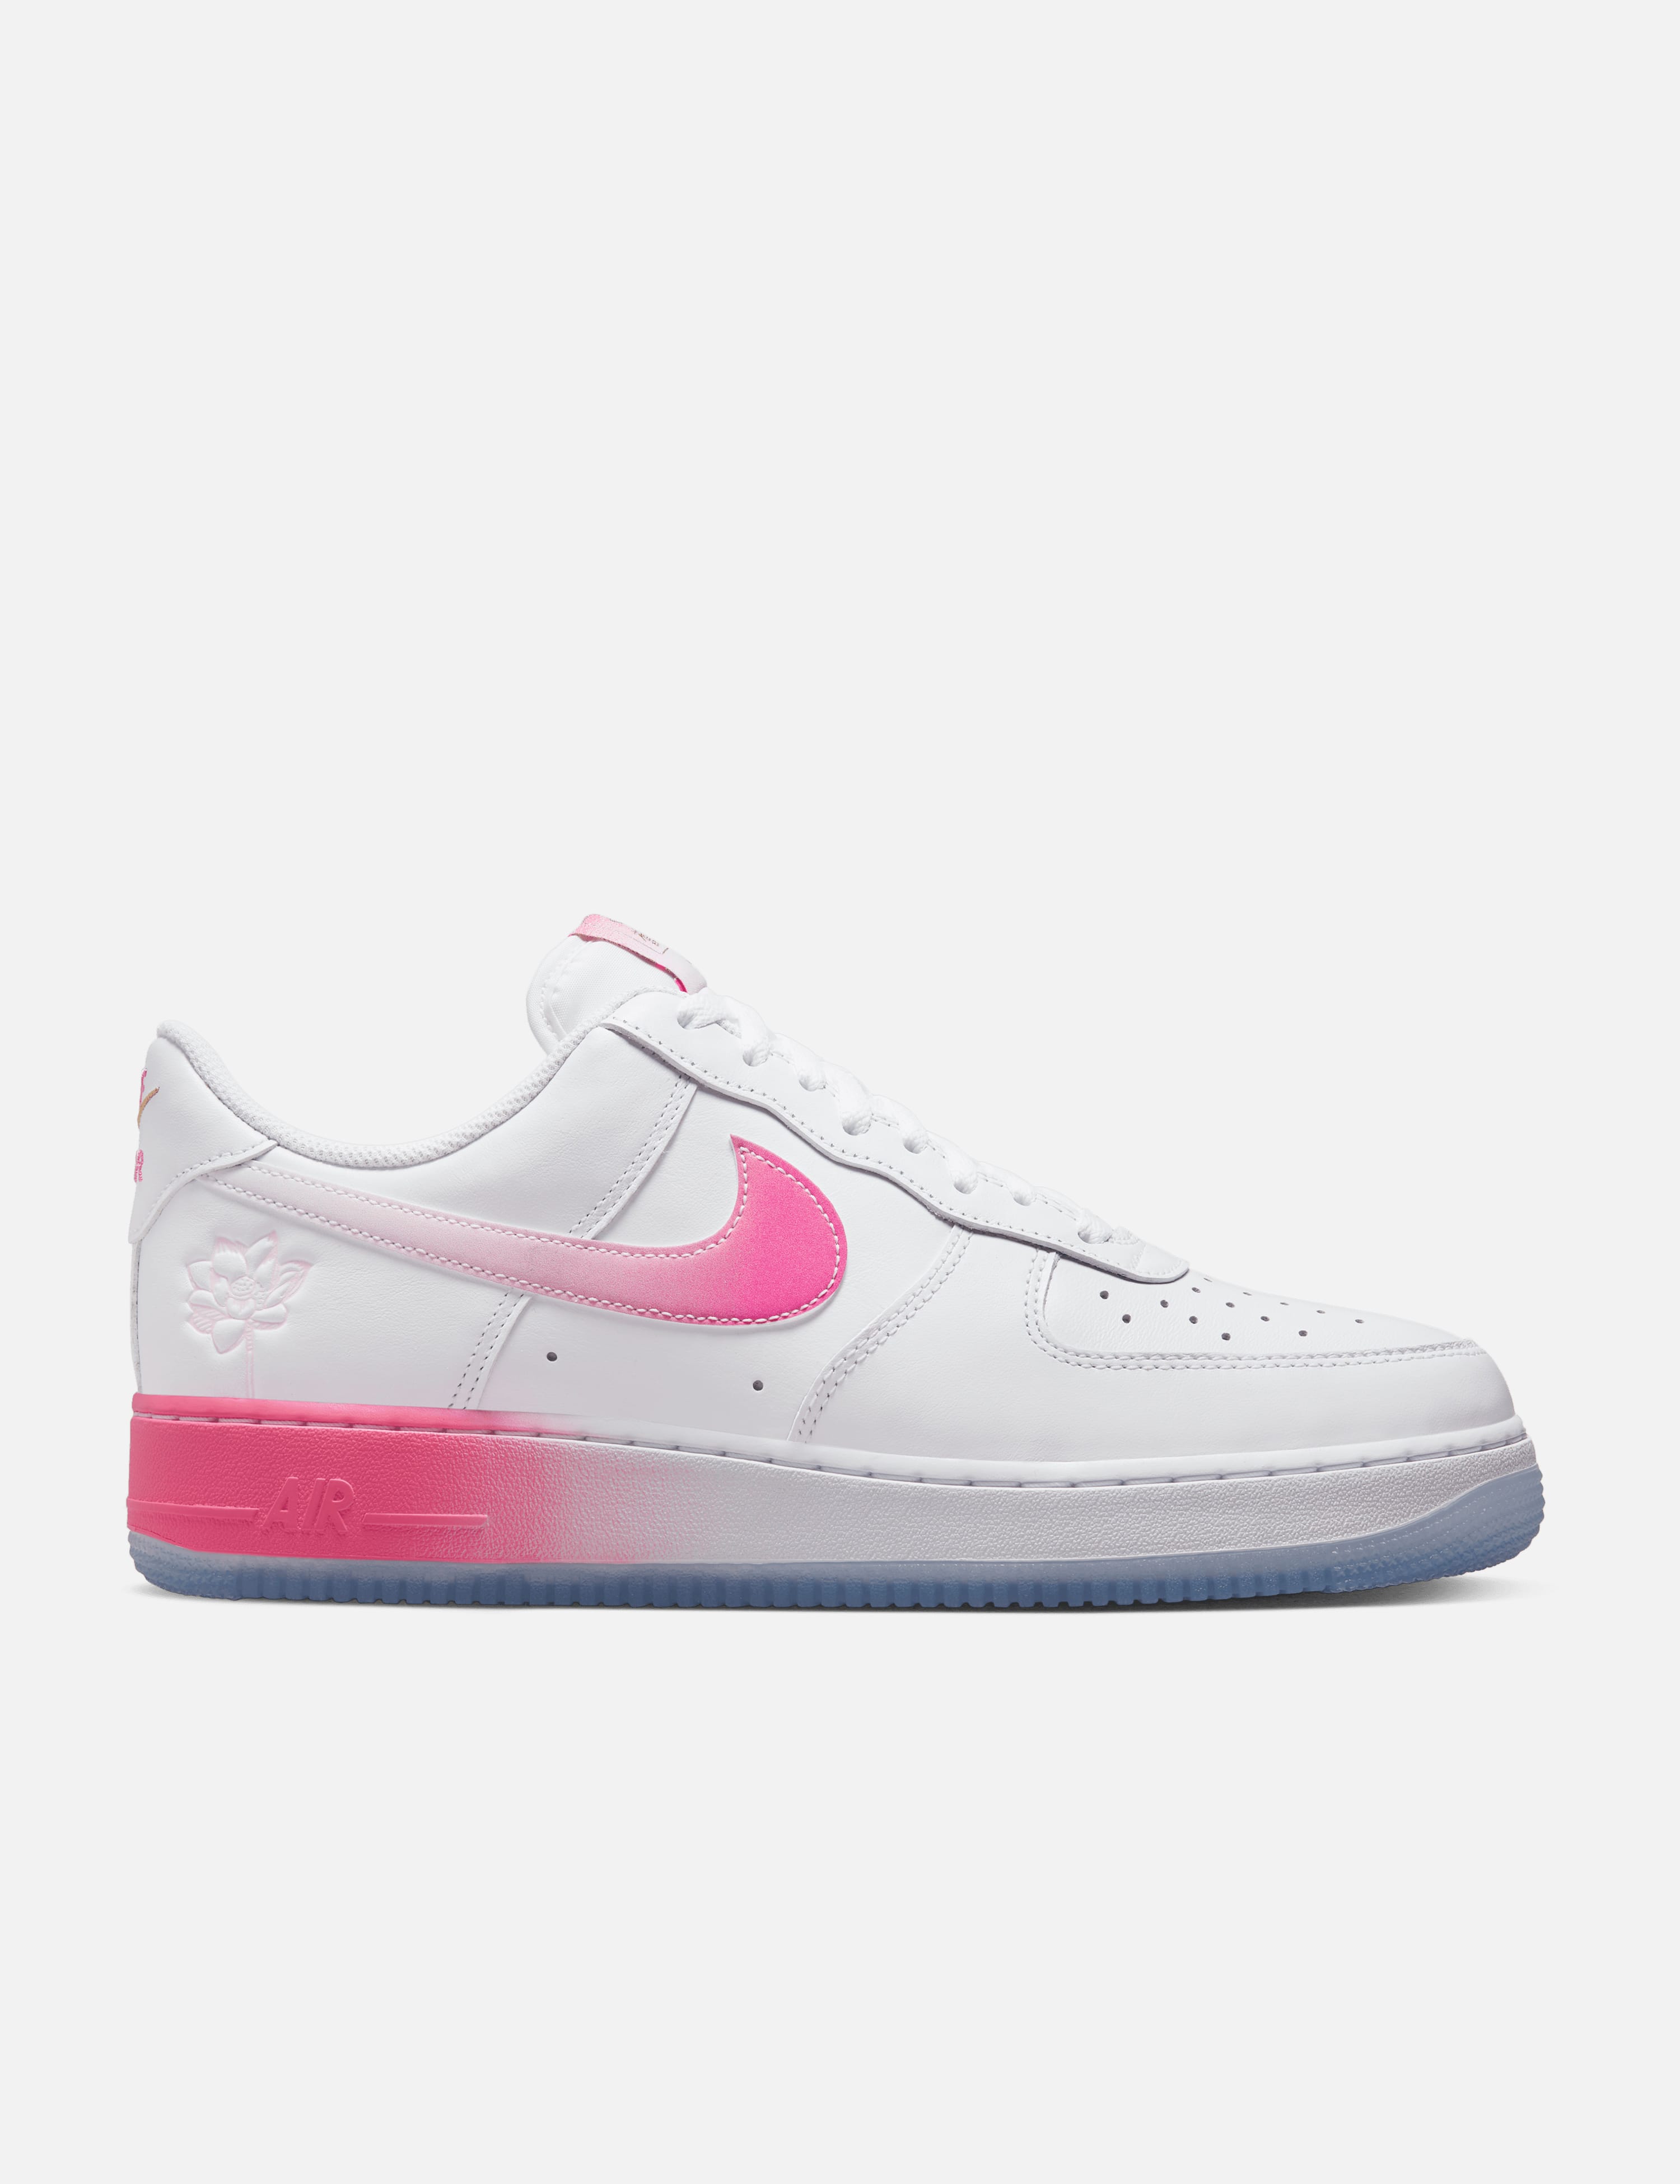 Nike   AIR FORCE 1 ' PRM   HBX   Globally Curated Fashion and